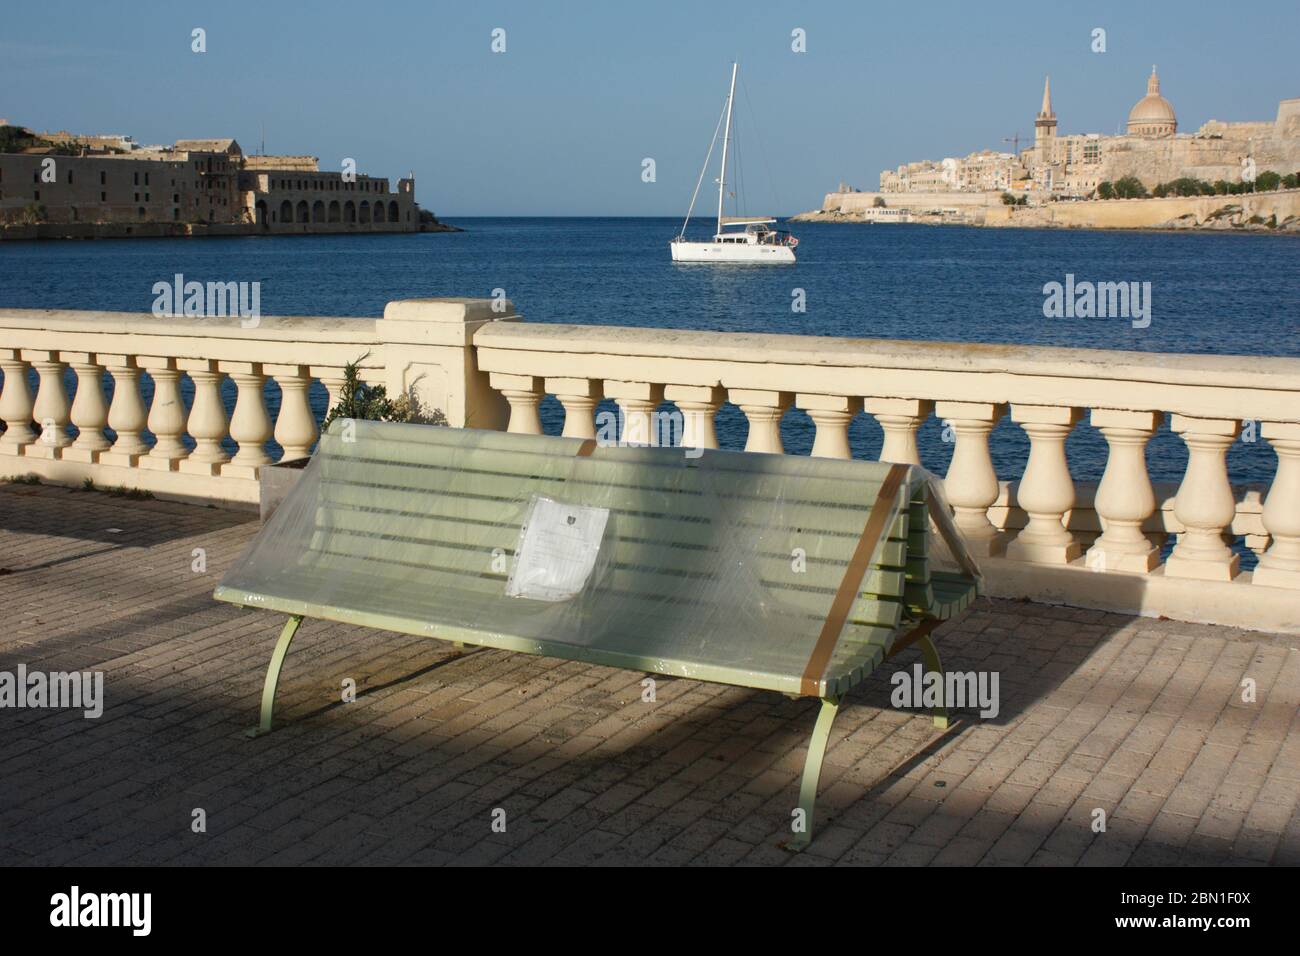 COVID-19 and coronavirus. Public bench covered in plastic sheeting in Malta, Europe, to enforce social distancing. Impact of pandemic on travel. Stock Photo